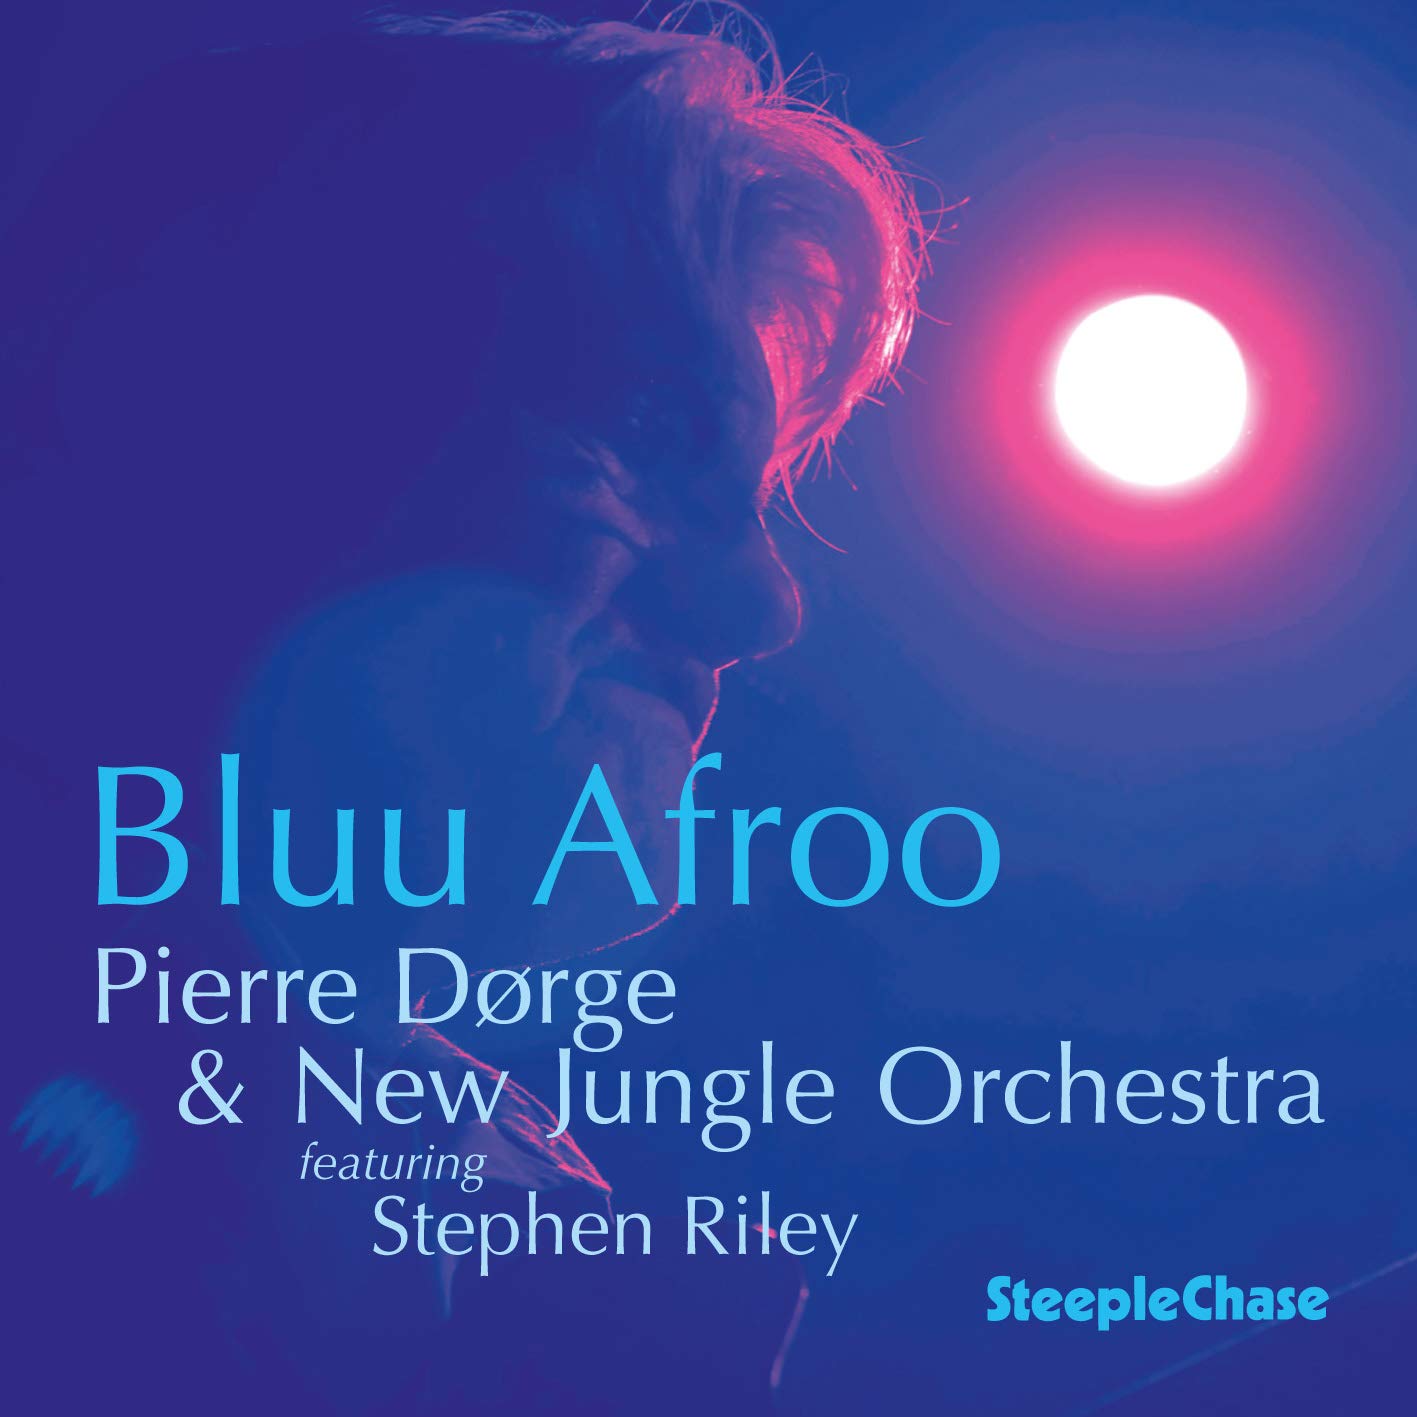 Pierre Dörge & New Jungle Orchestra feat. Stephen Riley - Bluu Afroo